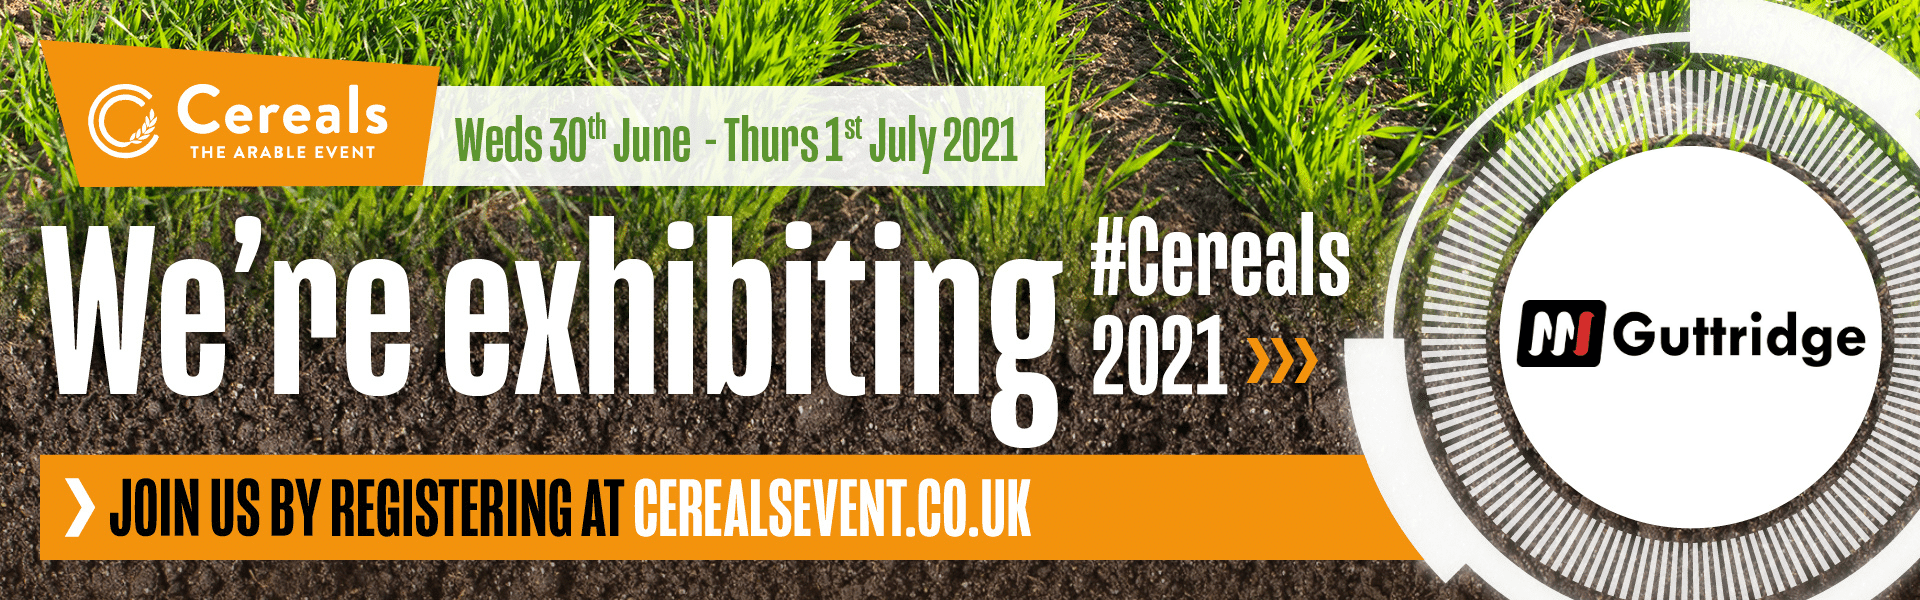 Guttridge are thrilled to exhibit at Cereals 2021 this June.